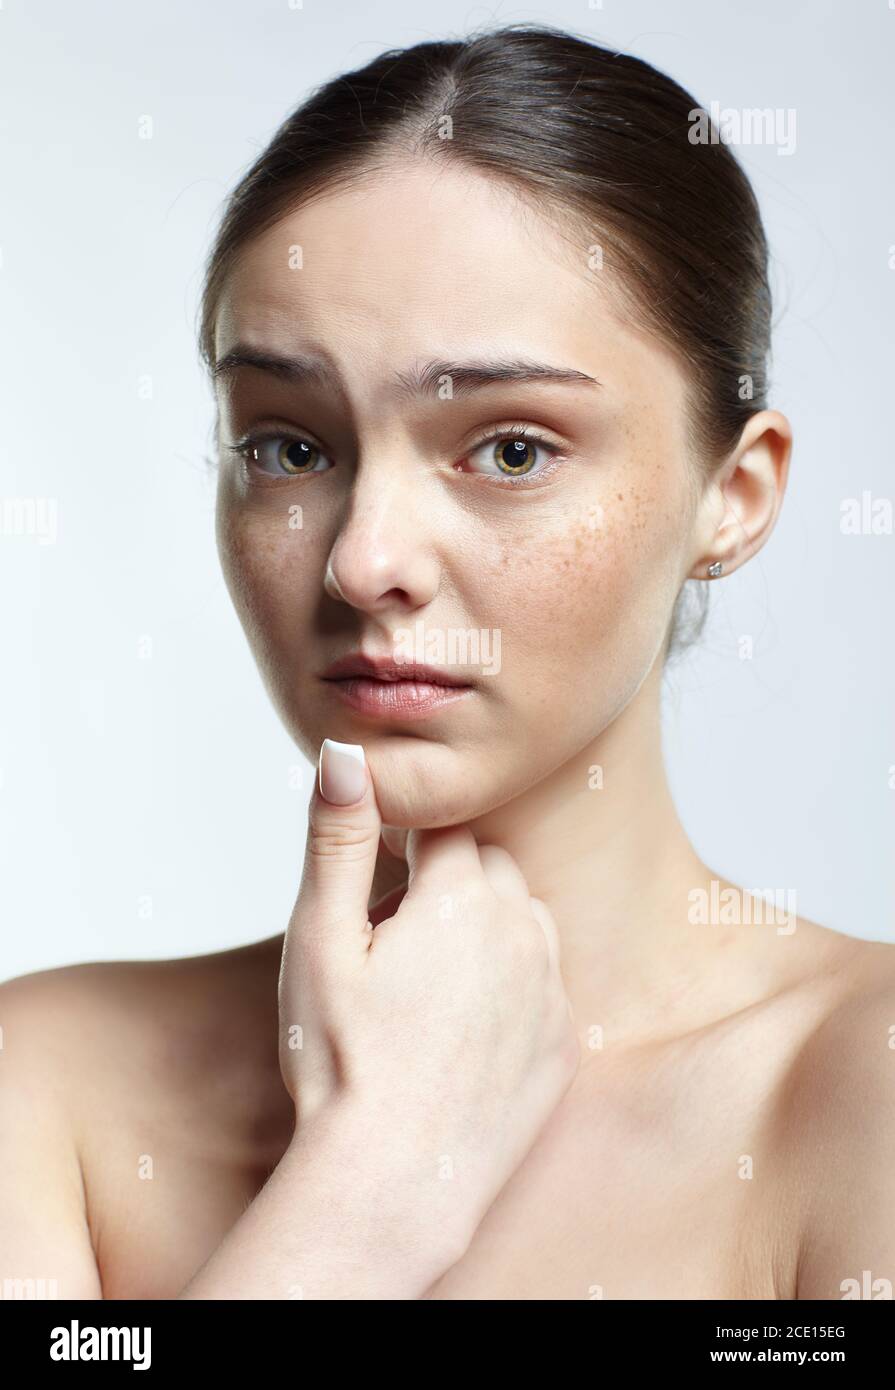 Headshot of emotional female face portrait with unhappy misunderstanding facial expression. Stock Photo